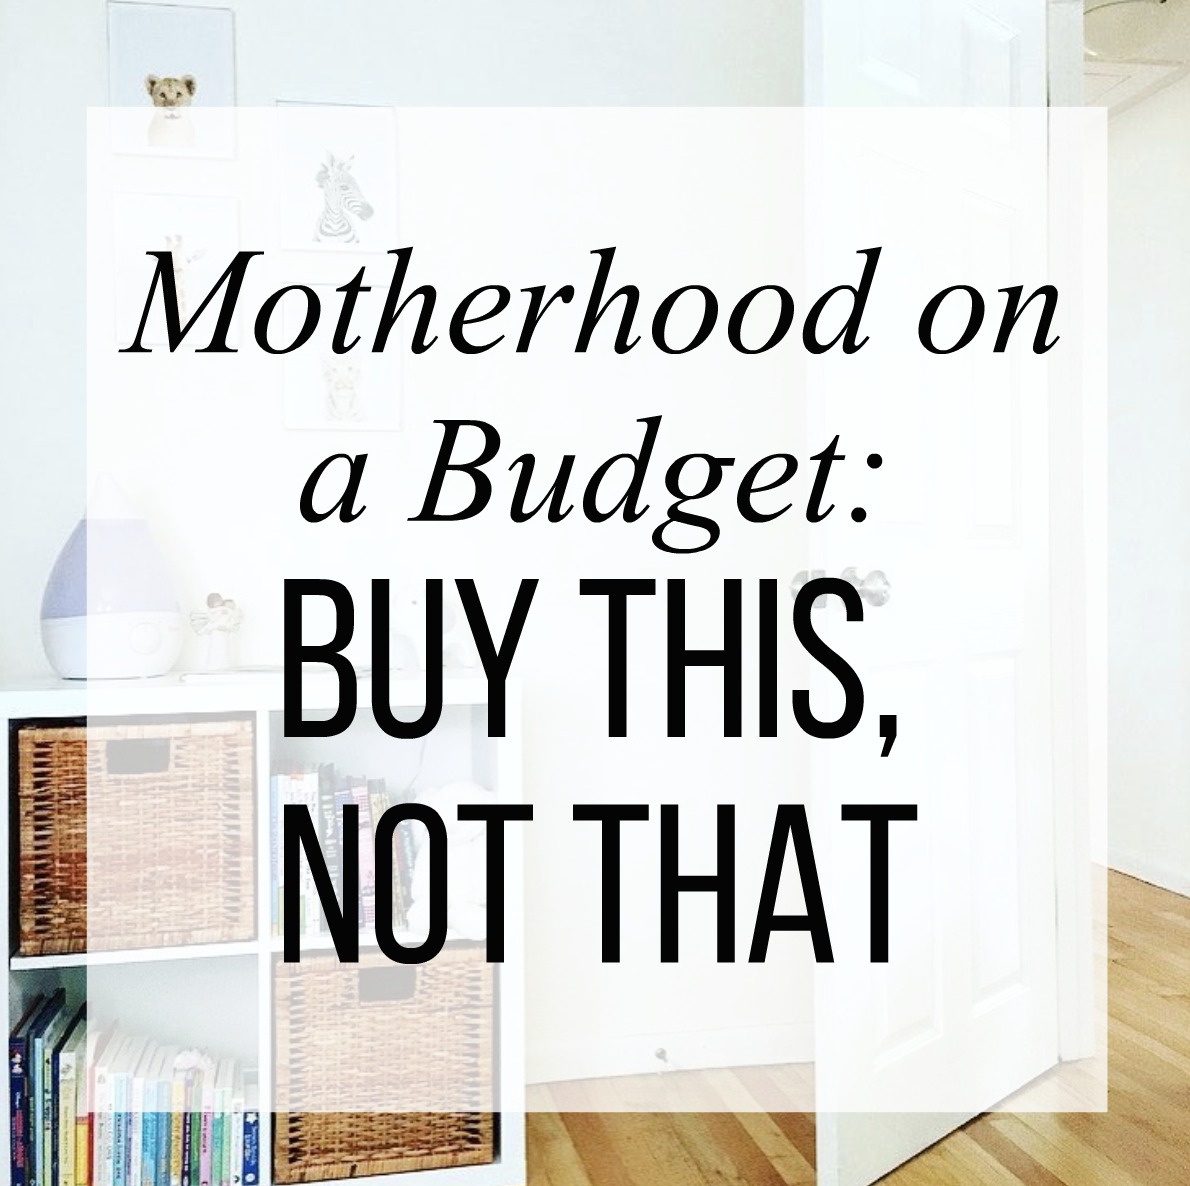 Motherhood on a Budget: Buy THIS, Not THAT